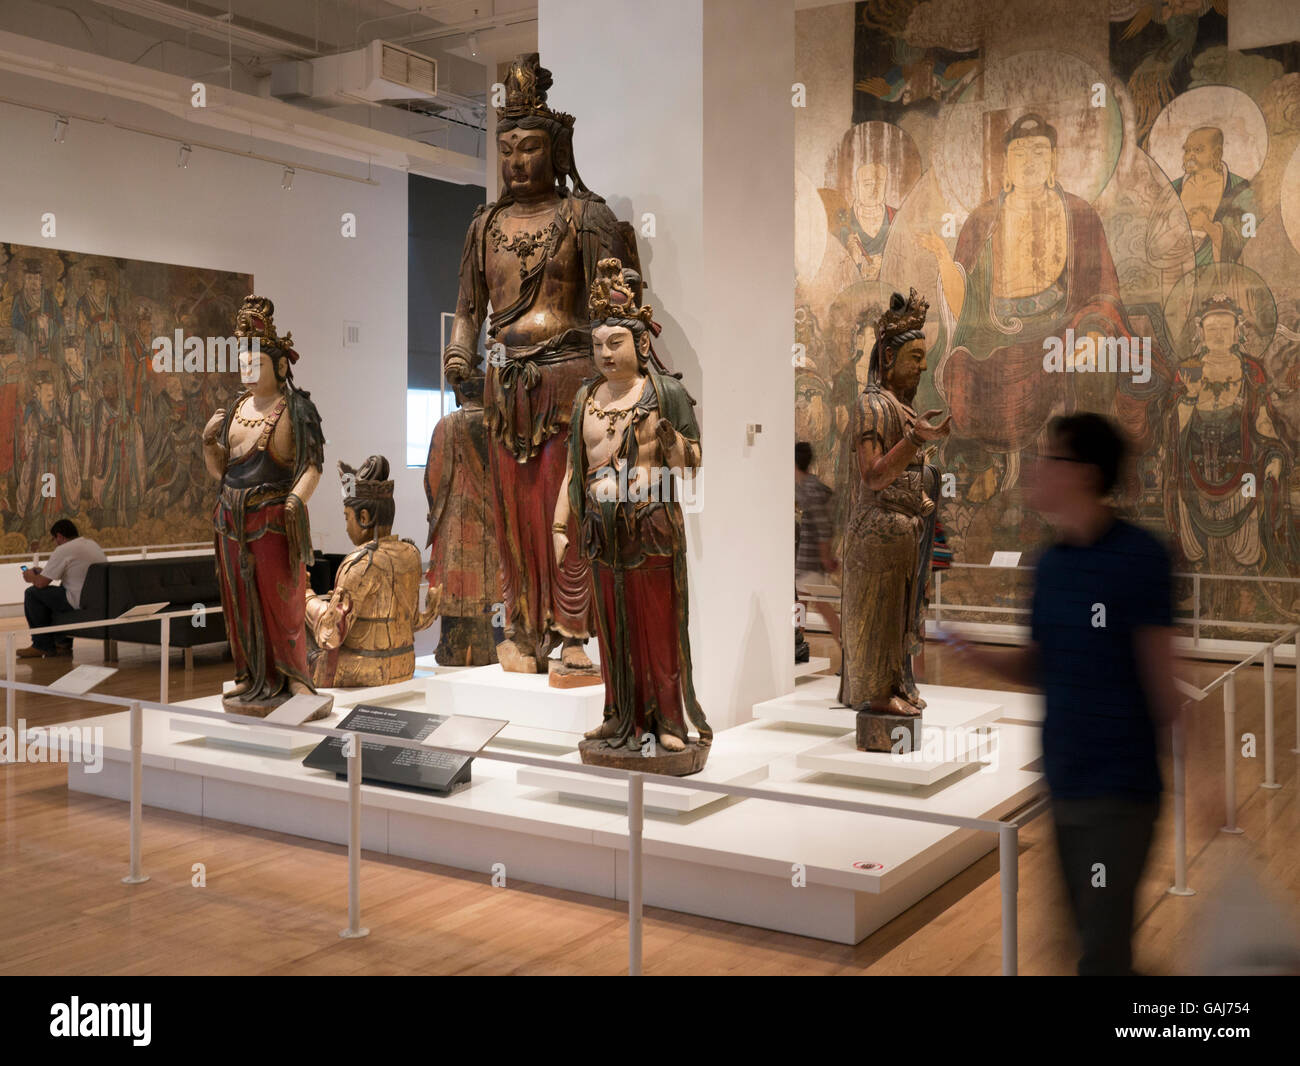 Visitors in Chinese exhibit on display in Royal Ontario Museum, Toronto, Canada. Stock Photo